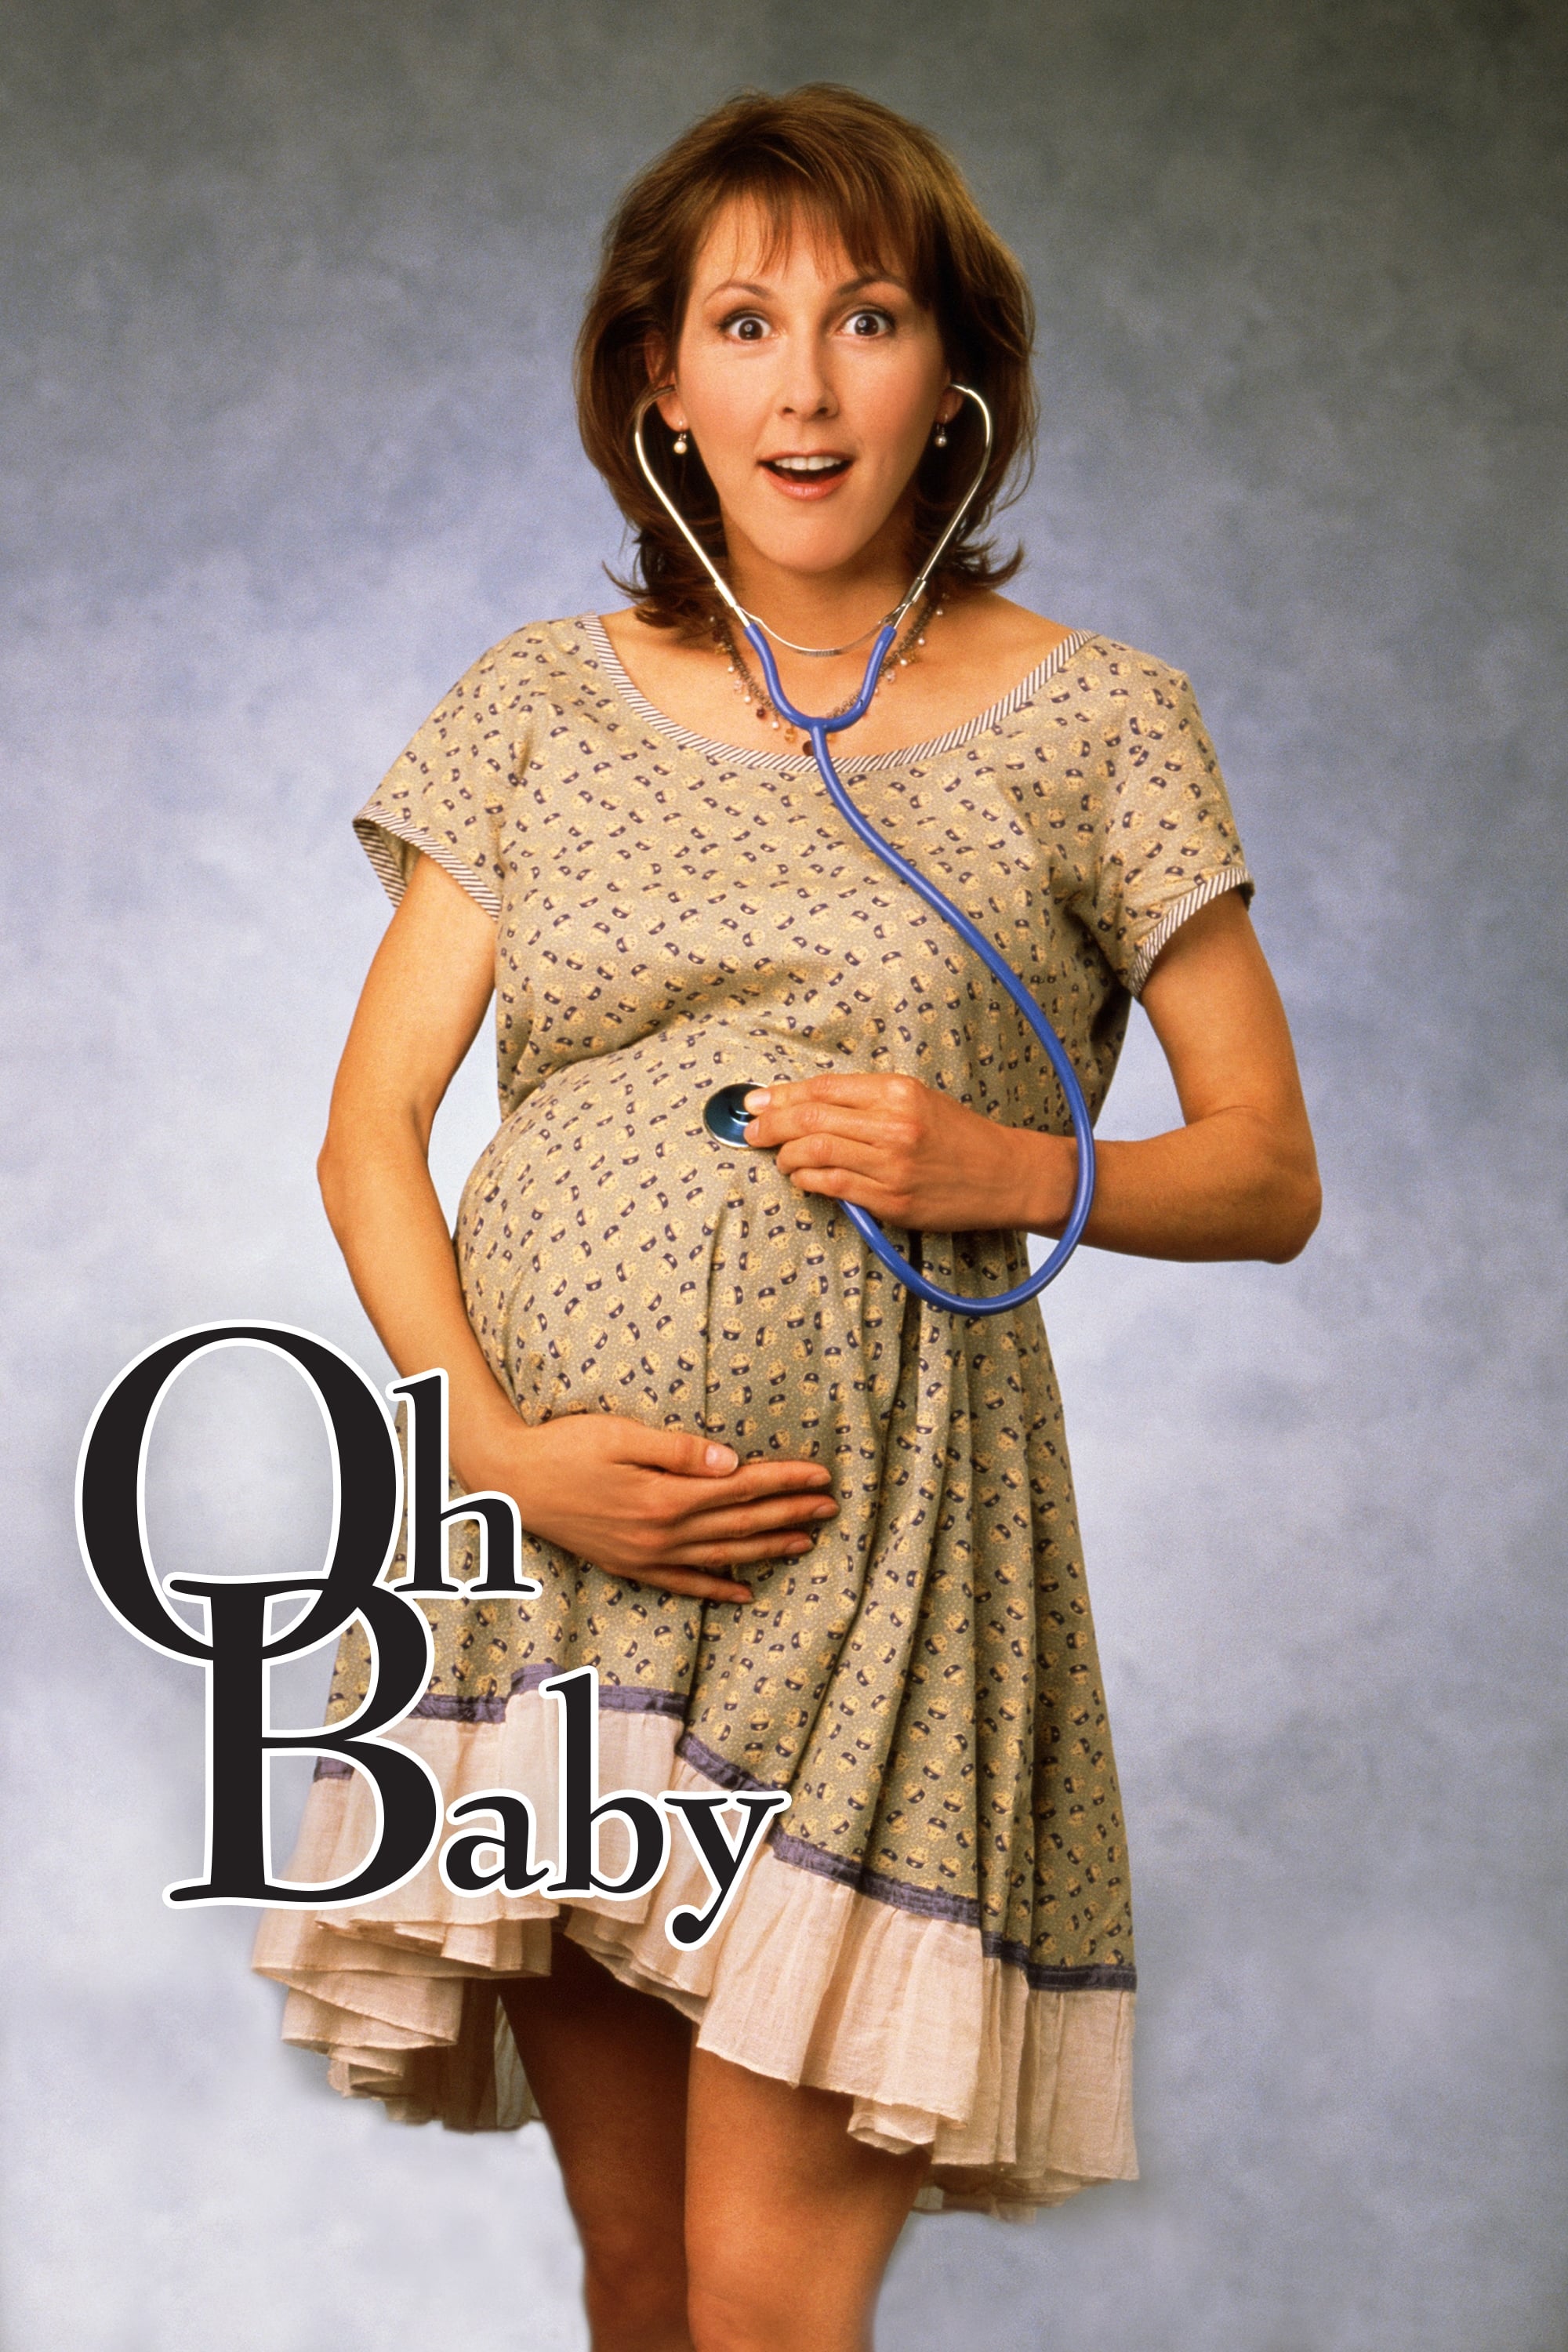 Oh Baby (1998)